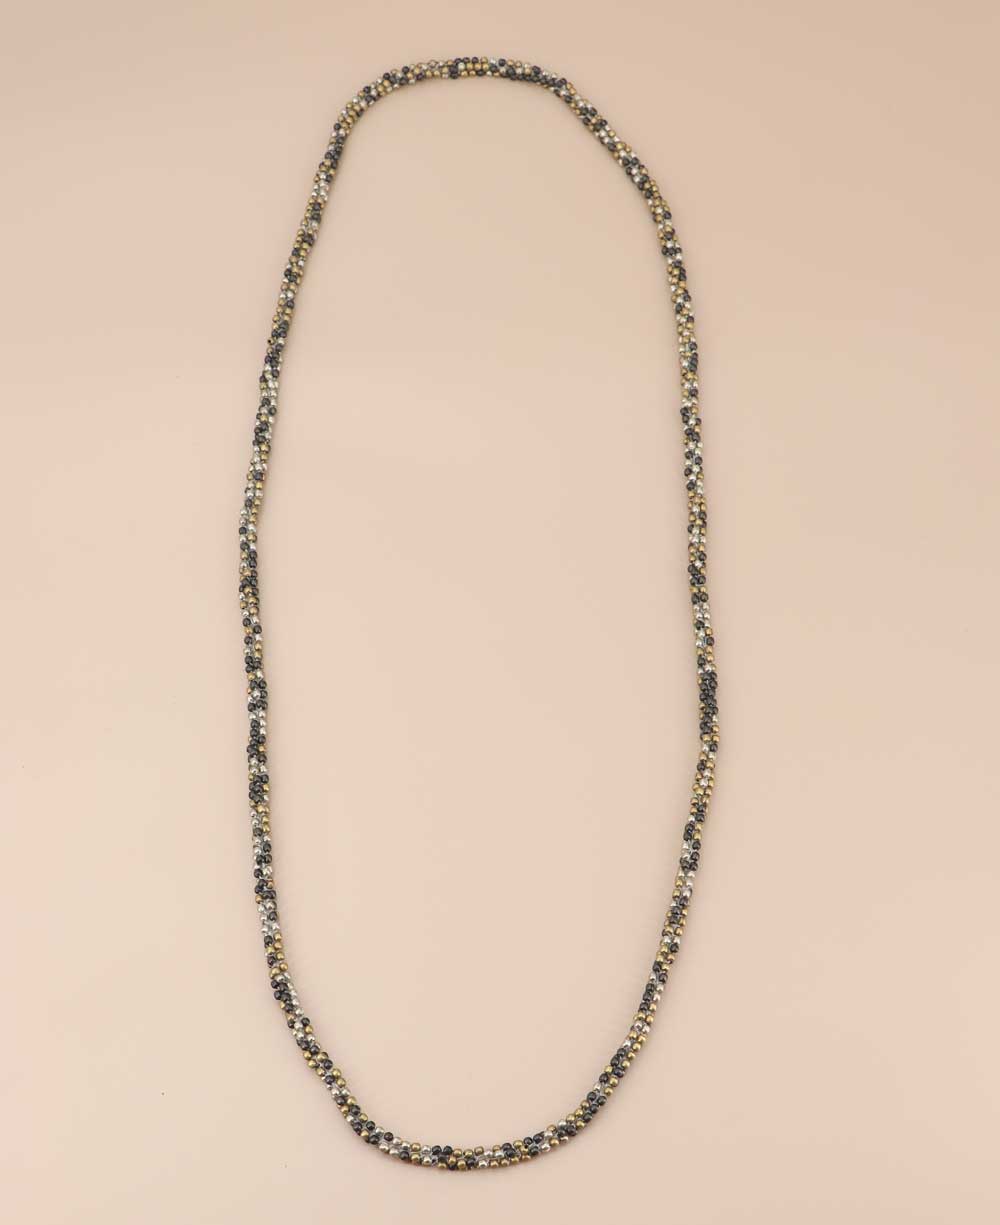 Handmade long strand necklace with small metal beads